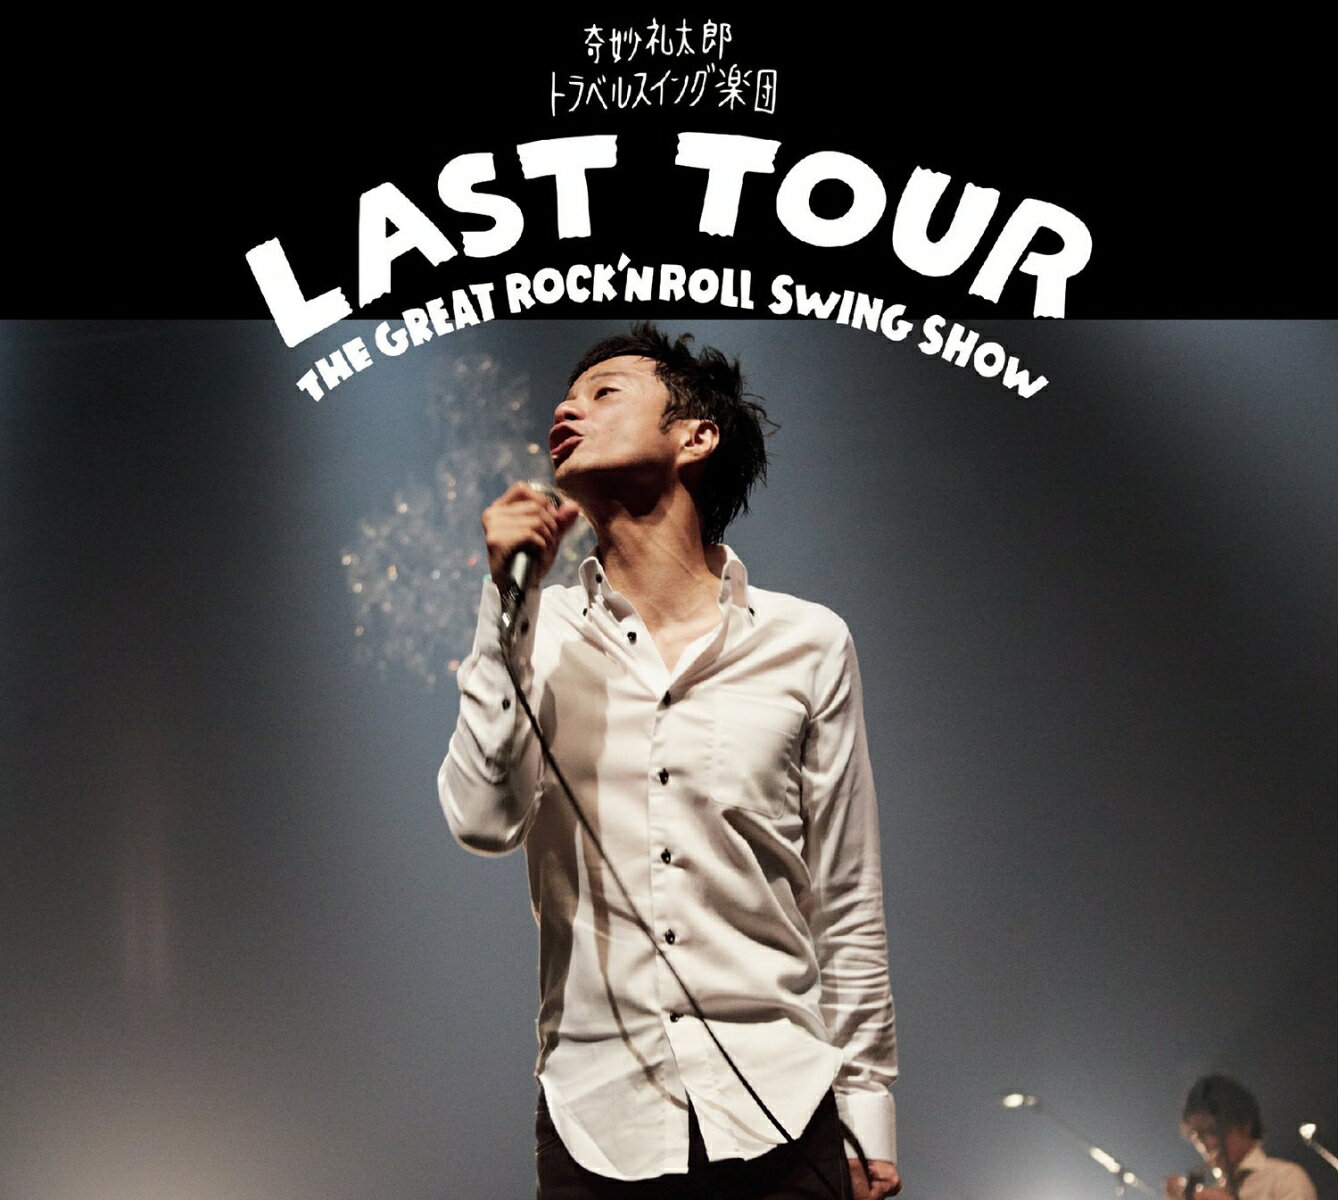 LAST TOUR〜THE GREAT ROCK'N ROLL SWING SHOW〜